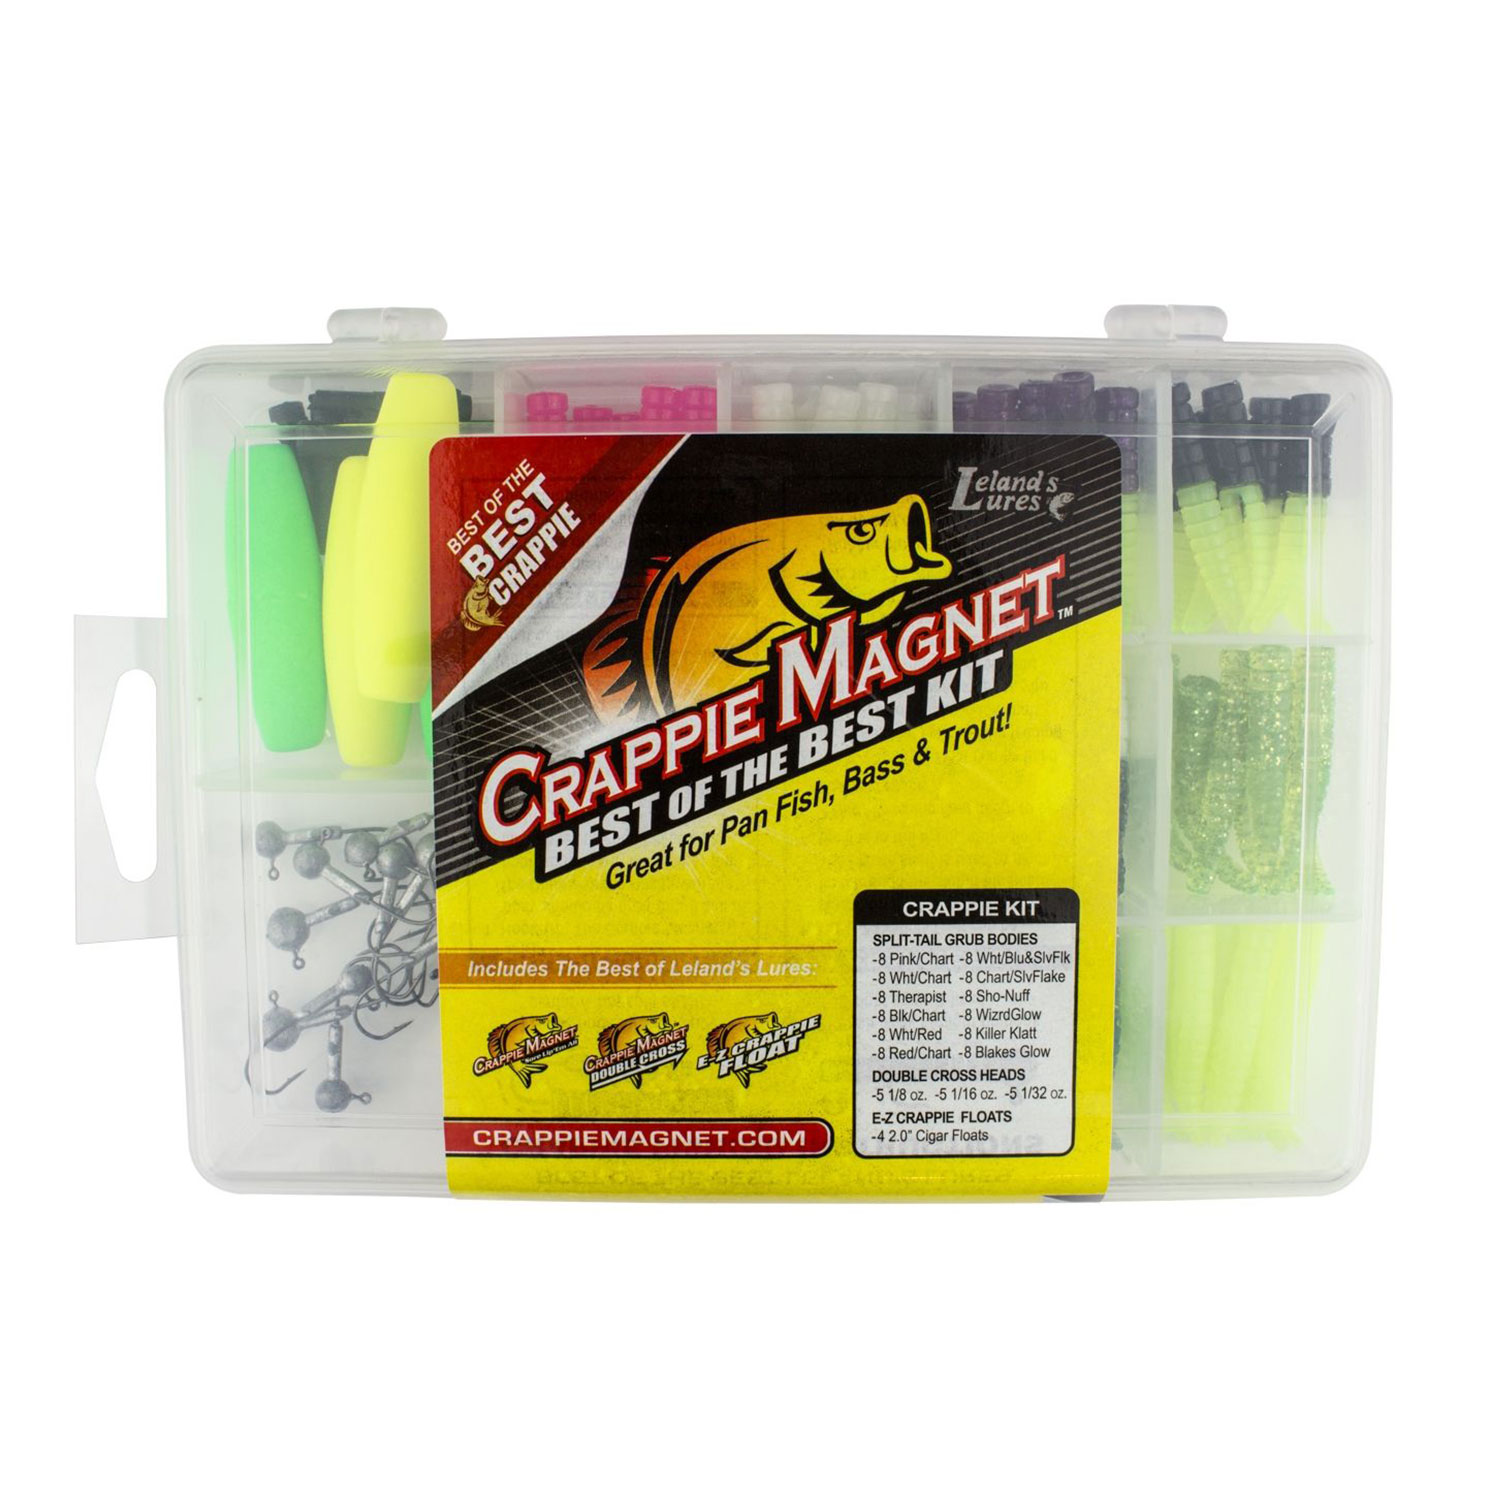 Crappie Magnet Tackle Pack Kit - Fishing Lures, Jig Hooks, Split Shots -  Designed to Catch Any Fish Including Bass, Crappie, Trout and More -  Portable